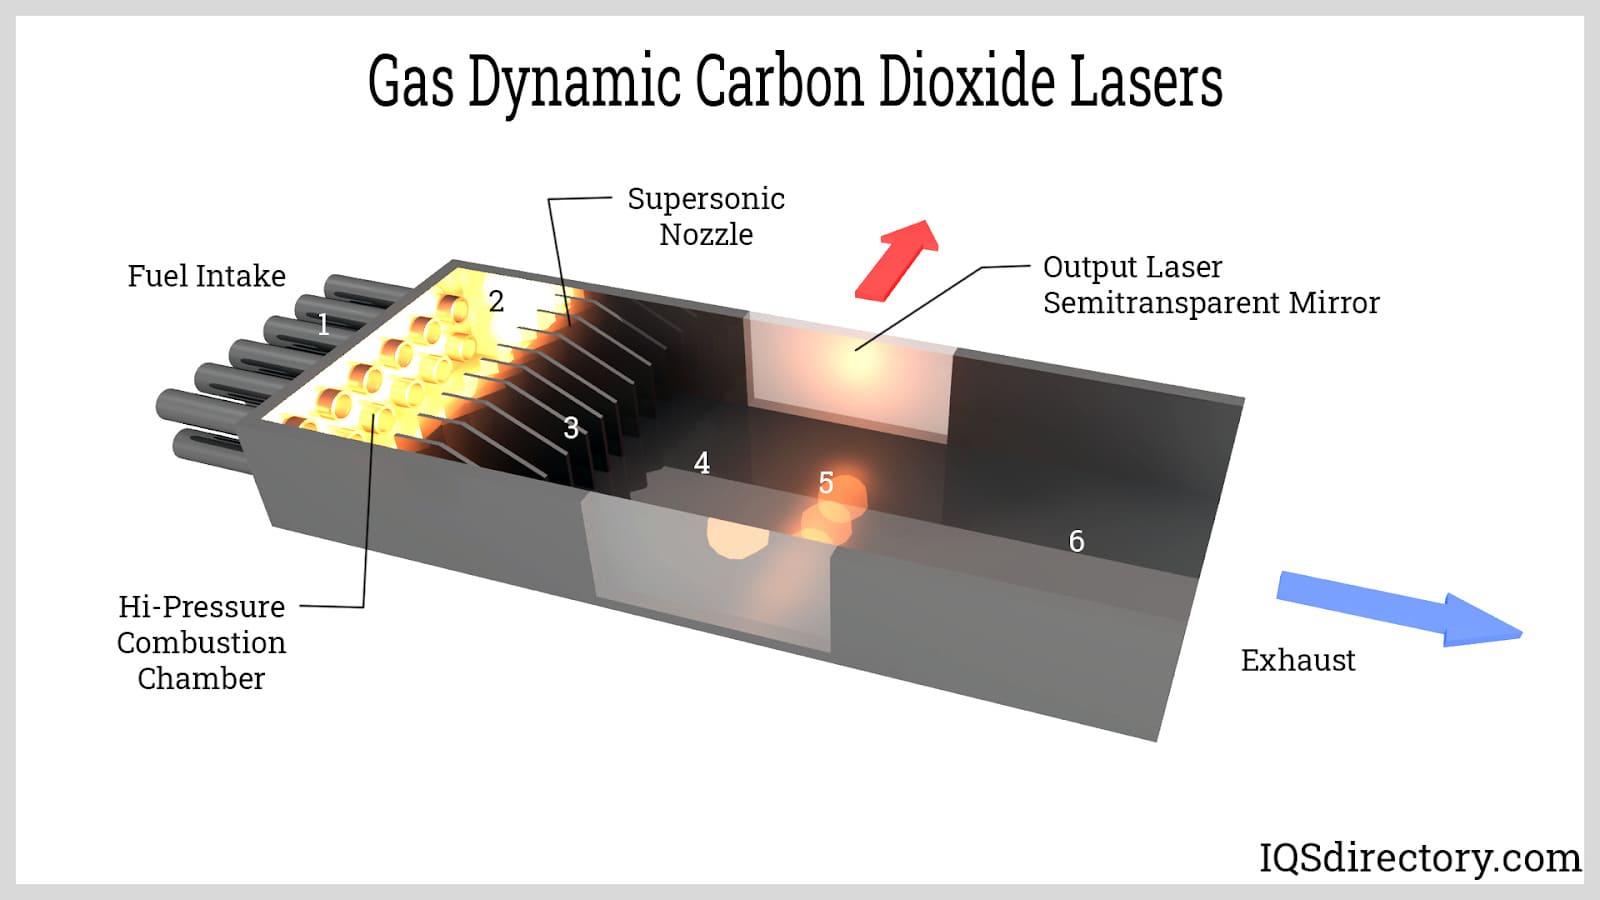  Gas Dynamic Carbon Dioxide Lasers